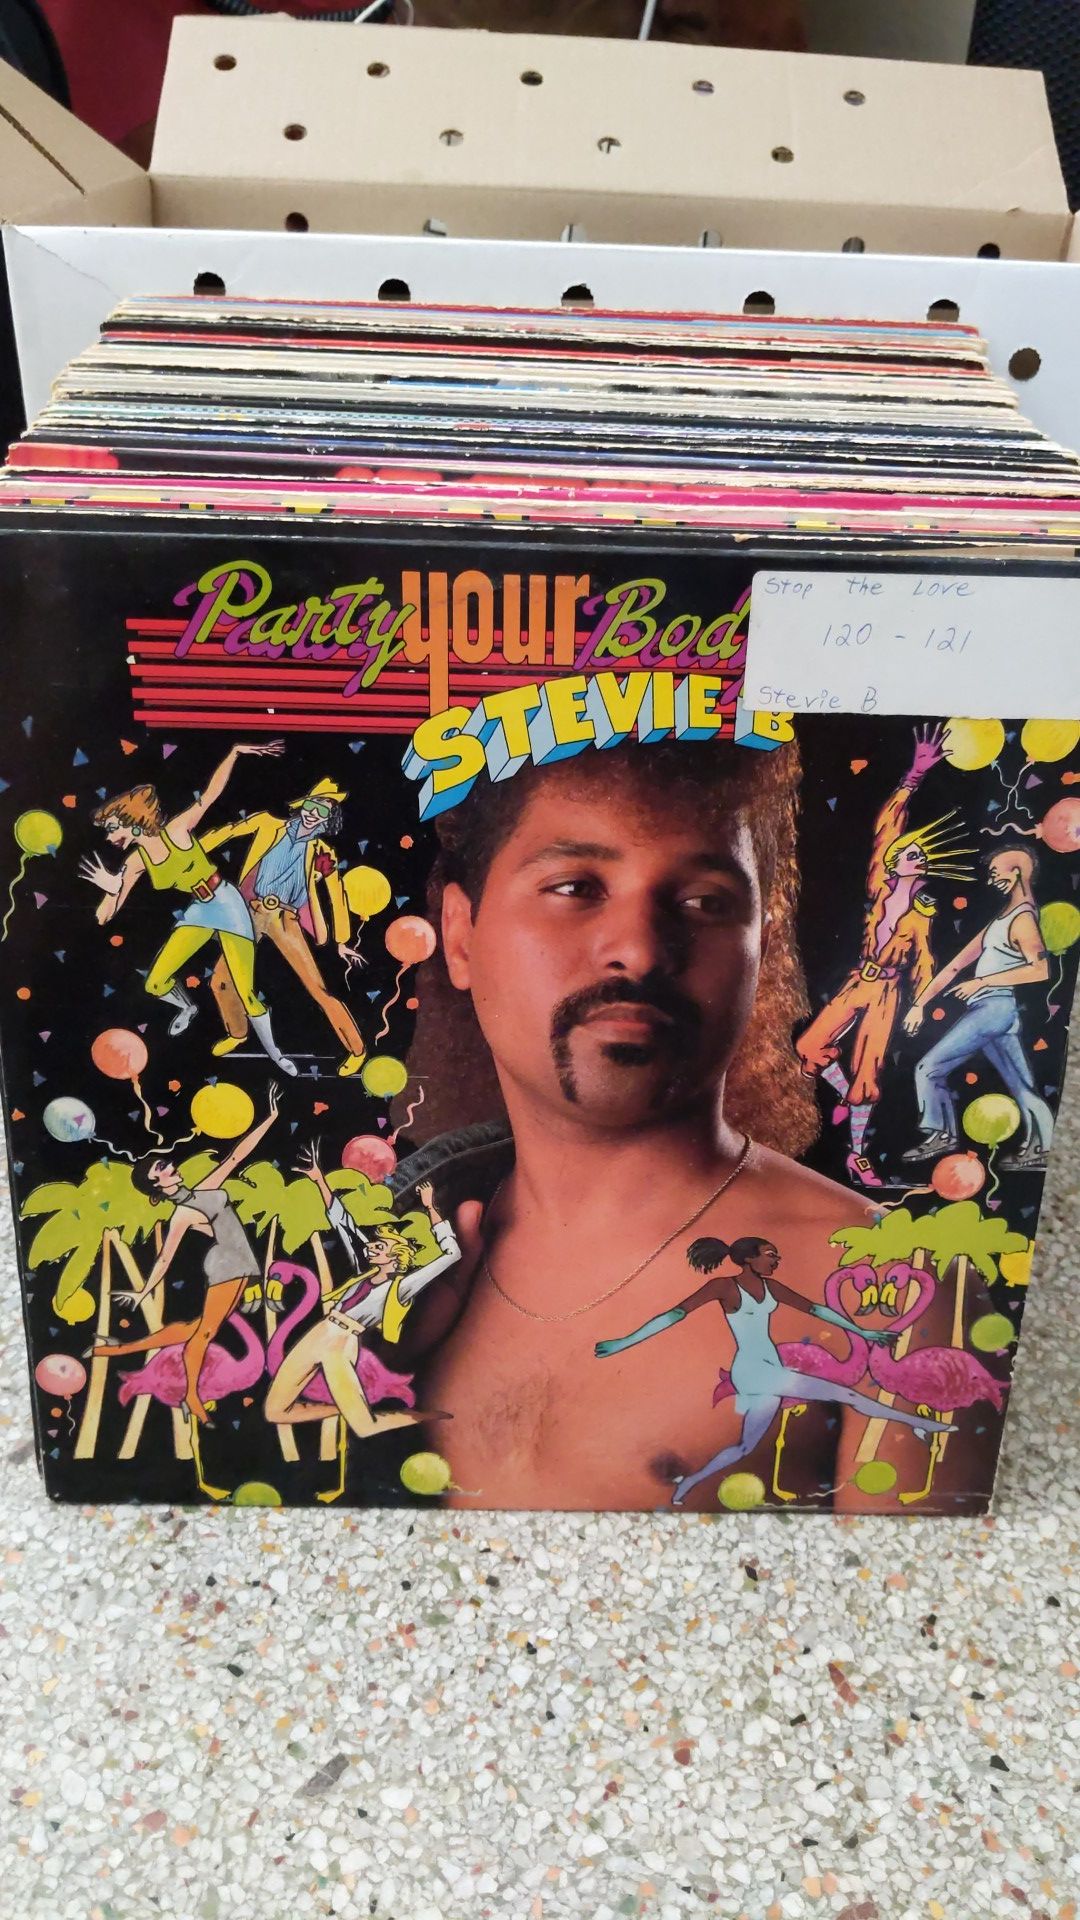 60 vinyl records of freestyle music from the 80s and 90s